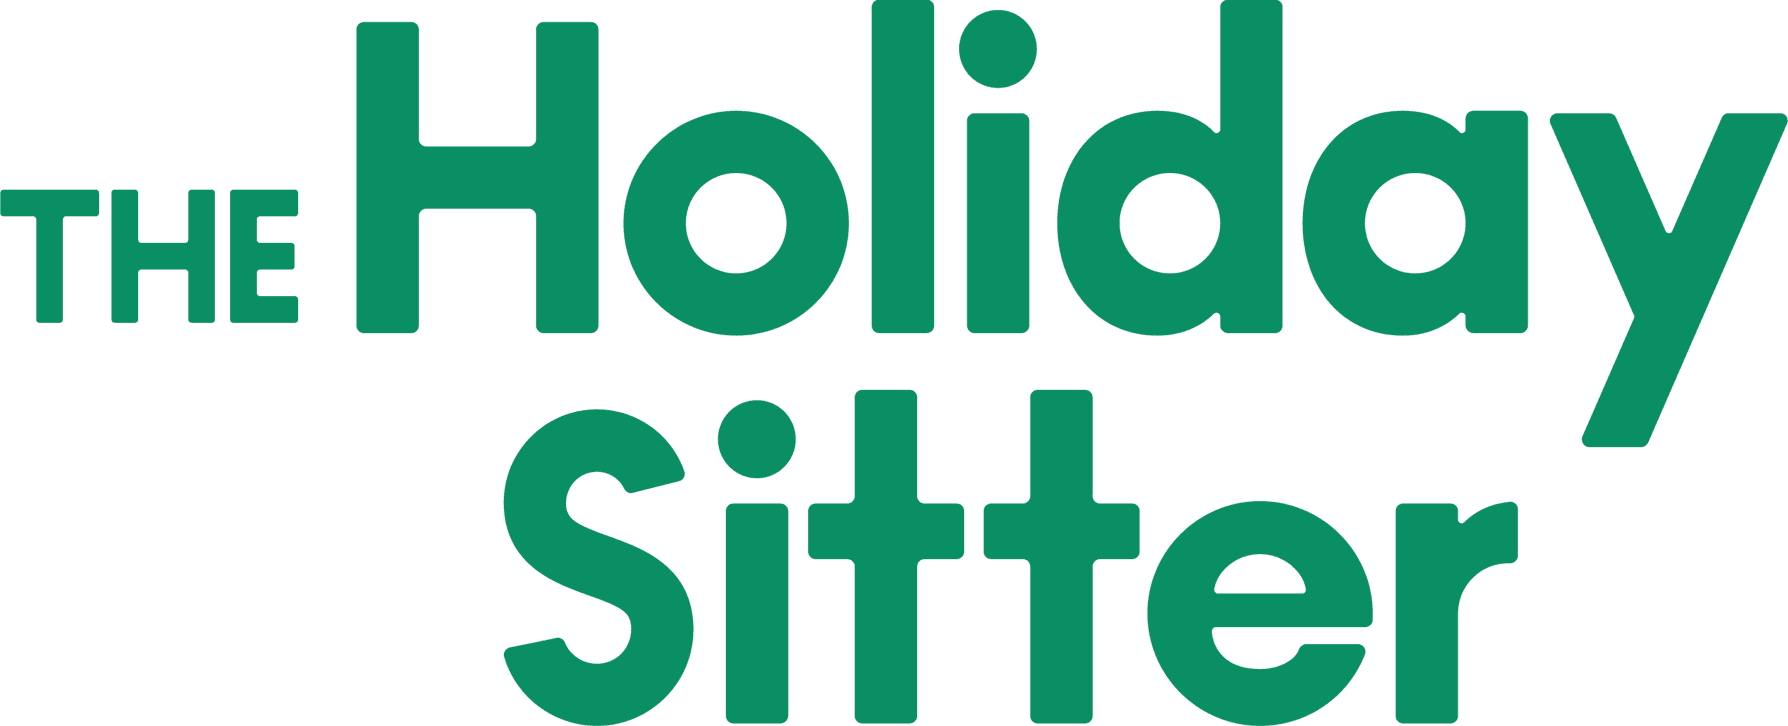 The Holiday Sitter logo